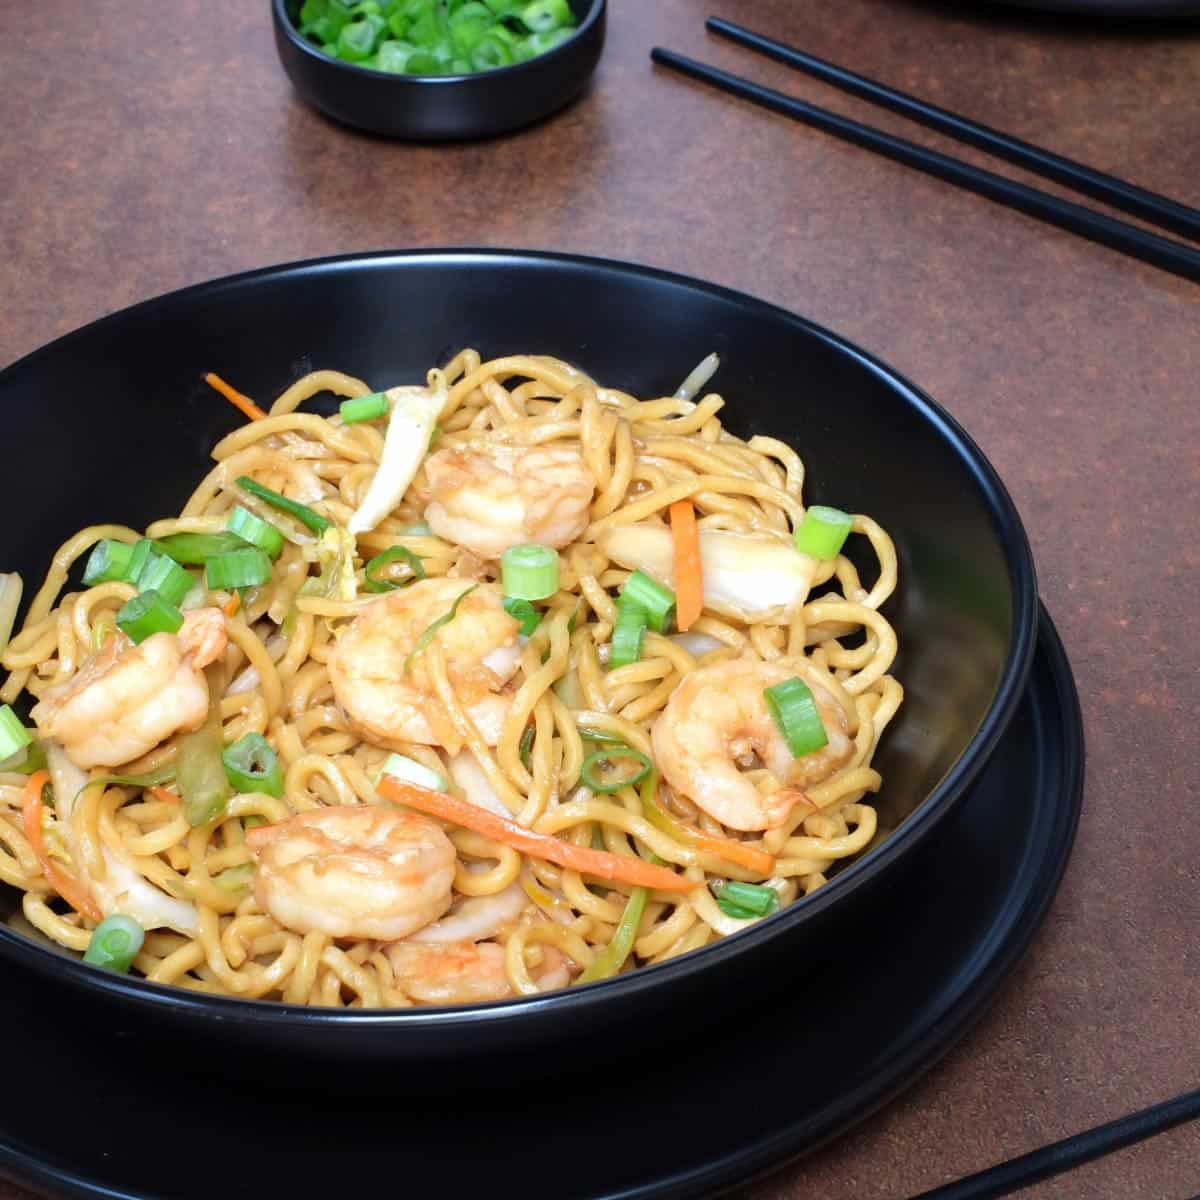 Shrimp Lo Mein with carrots and green onions in a black bowl.